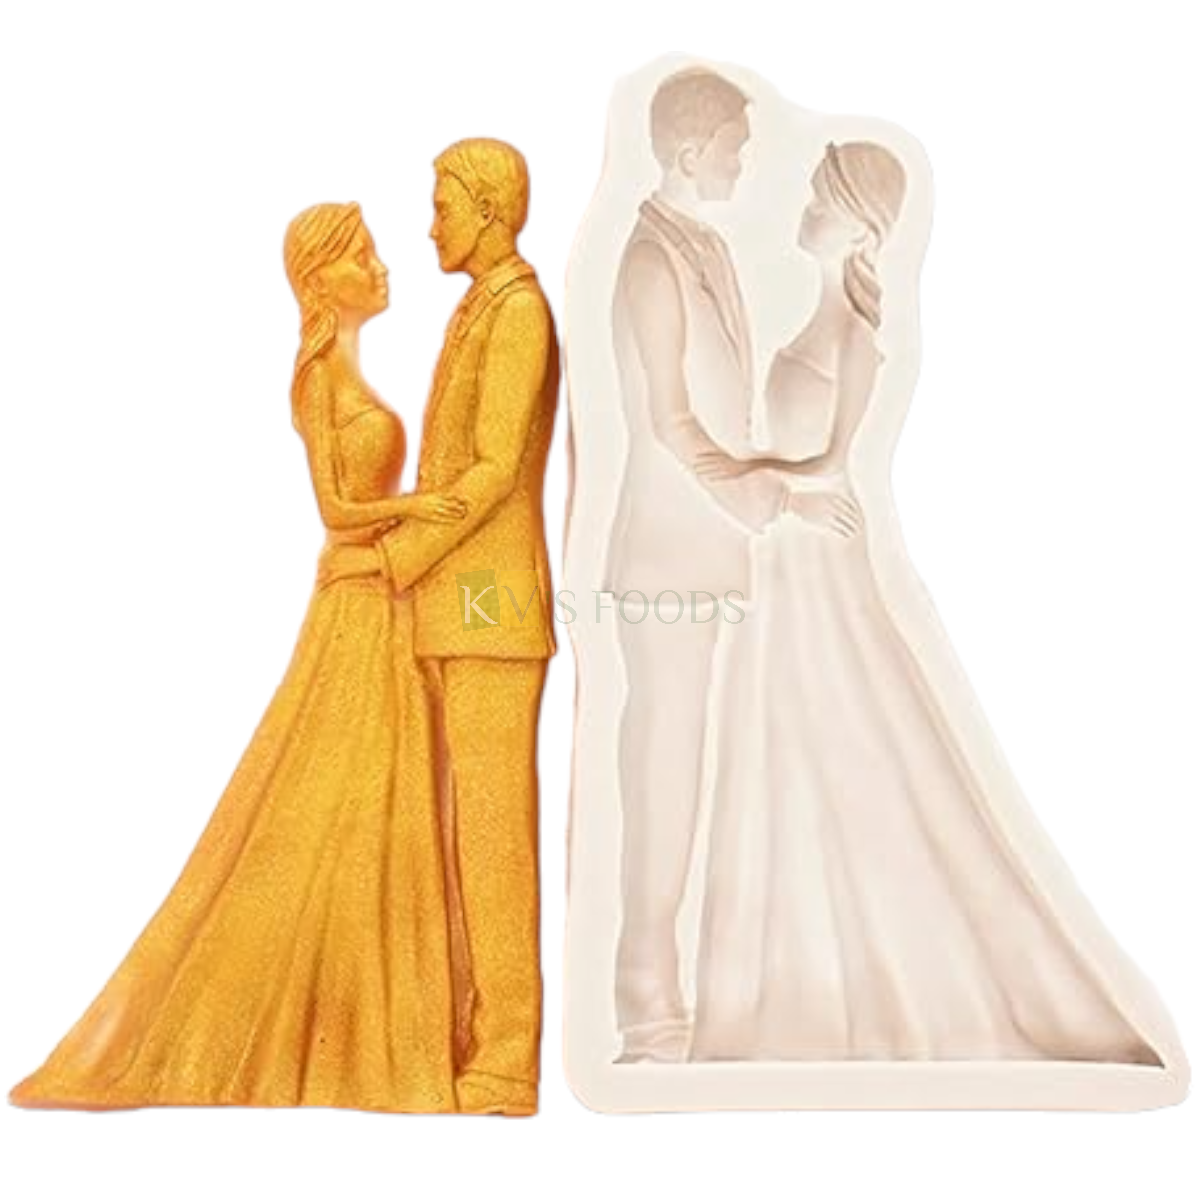 1 PC Fondant Standing Bride and Groom Chocolate Mould, Happy Wedding Couple, Romantic Engagement Cake, Anniversary Celebration Cake Theme Silicone Flexible Moulds DIY Fondant Side Decorating Mould